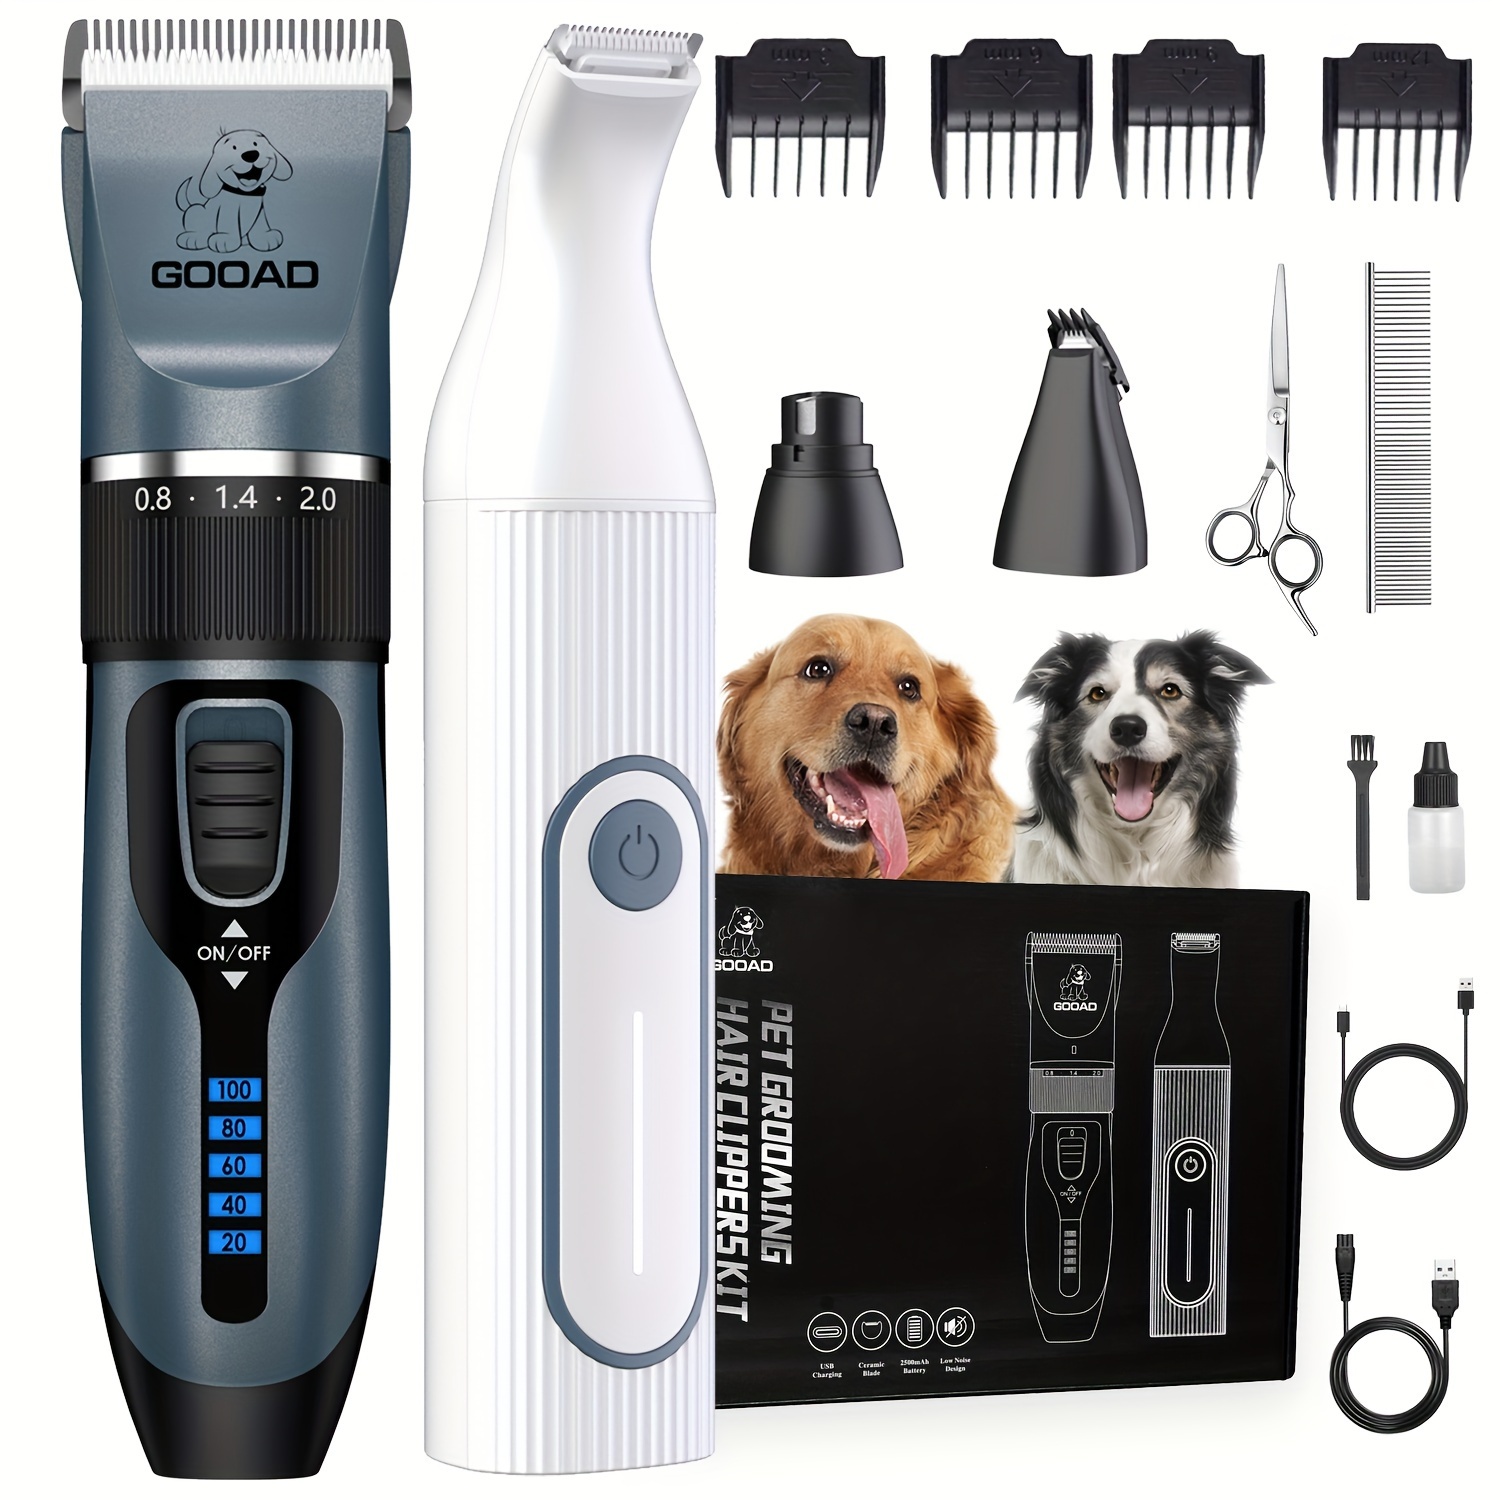 

Gooad Dog Clippers Grooming Kit Hair Clipper -4 In 1low Noise -rechargeable-cordless Quiet Paw Trimmer Nail Grinder Trimmer Grooming For Thick Hair&coats Pet Shaver For Small And Large Dogs Cats